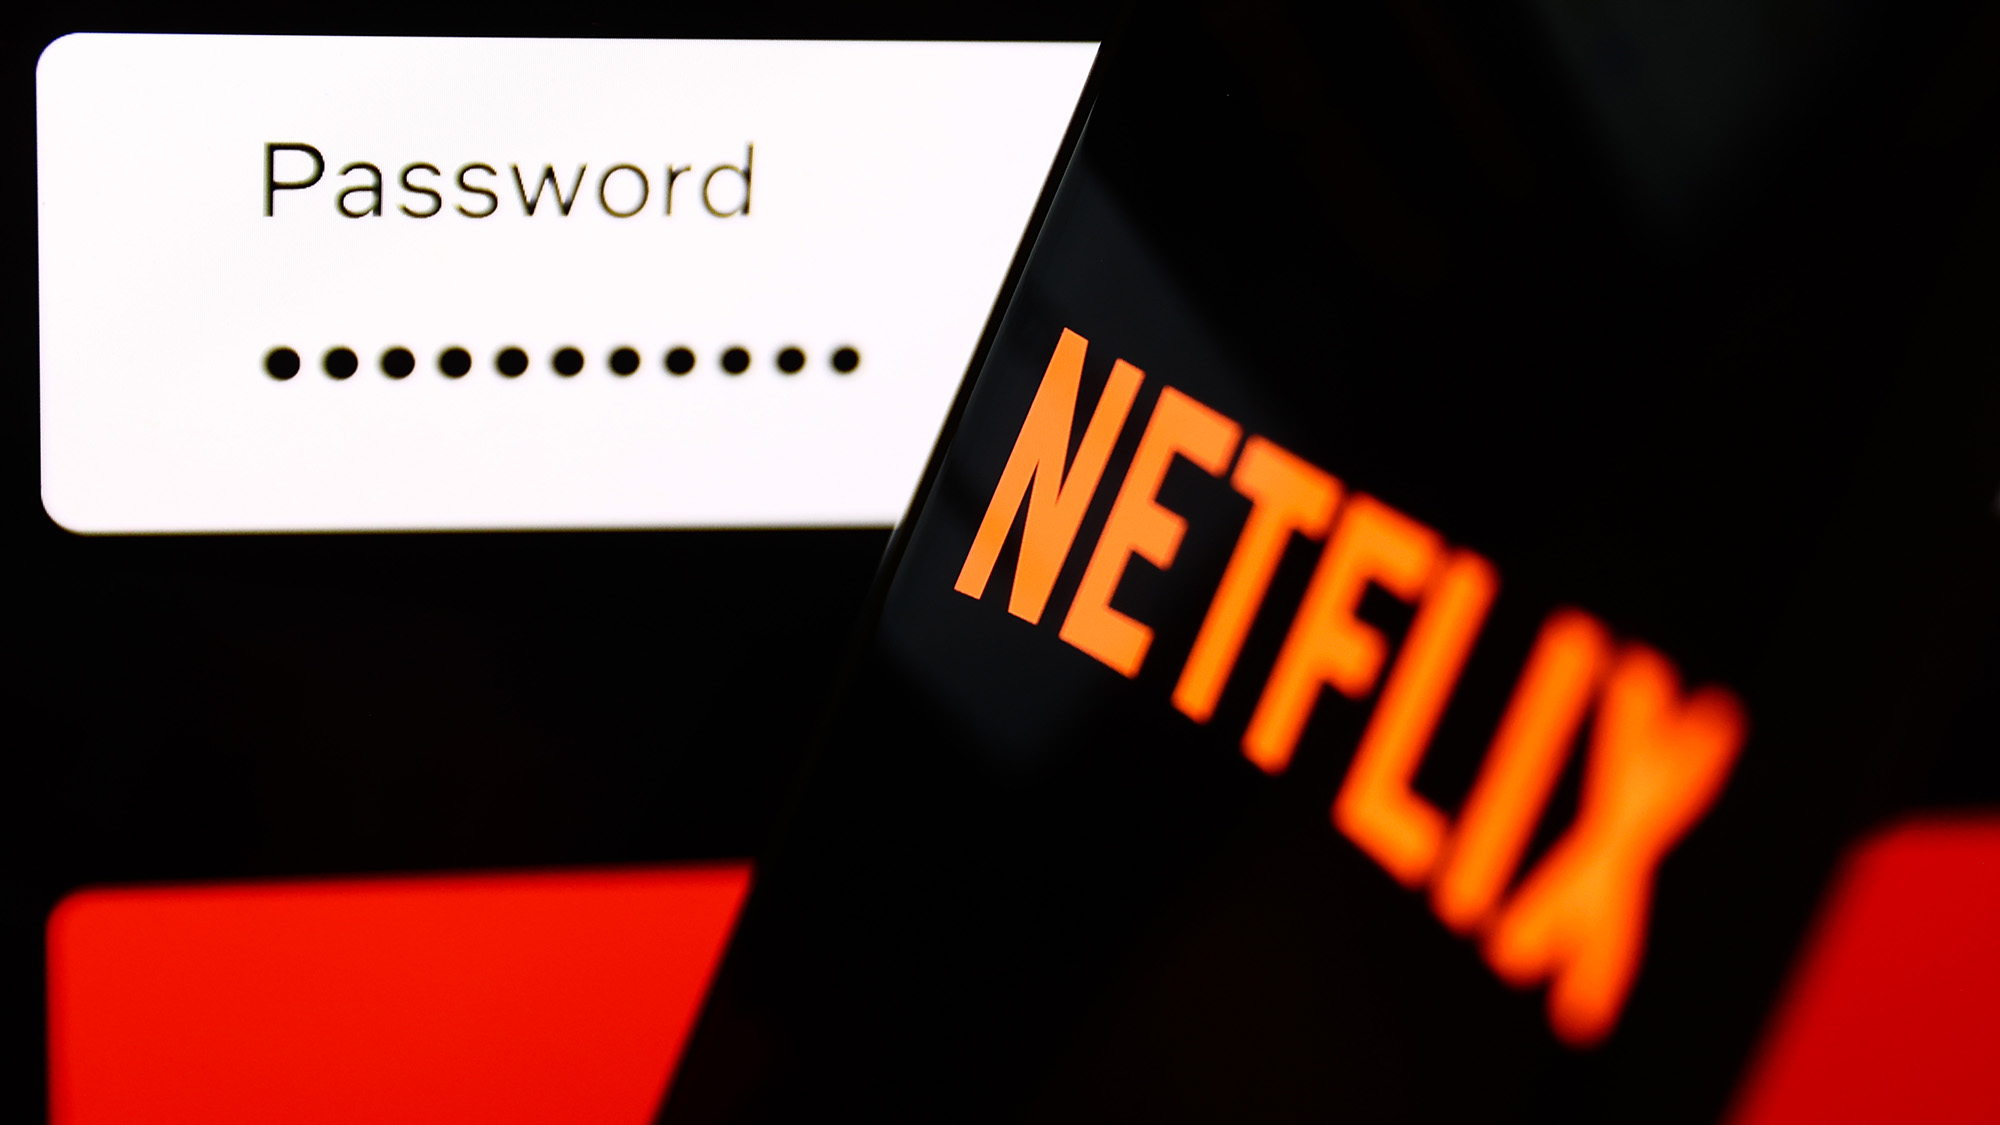 Netflix's subscribers surge after password-sharing crackdown, Television